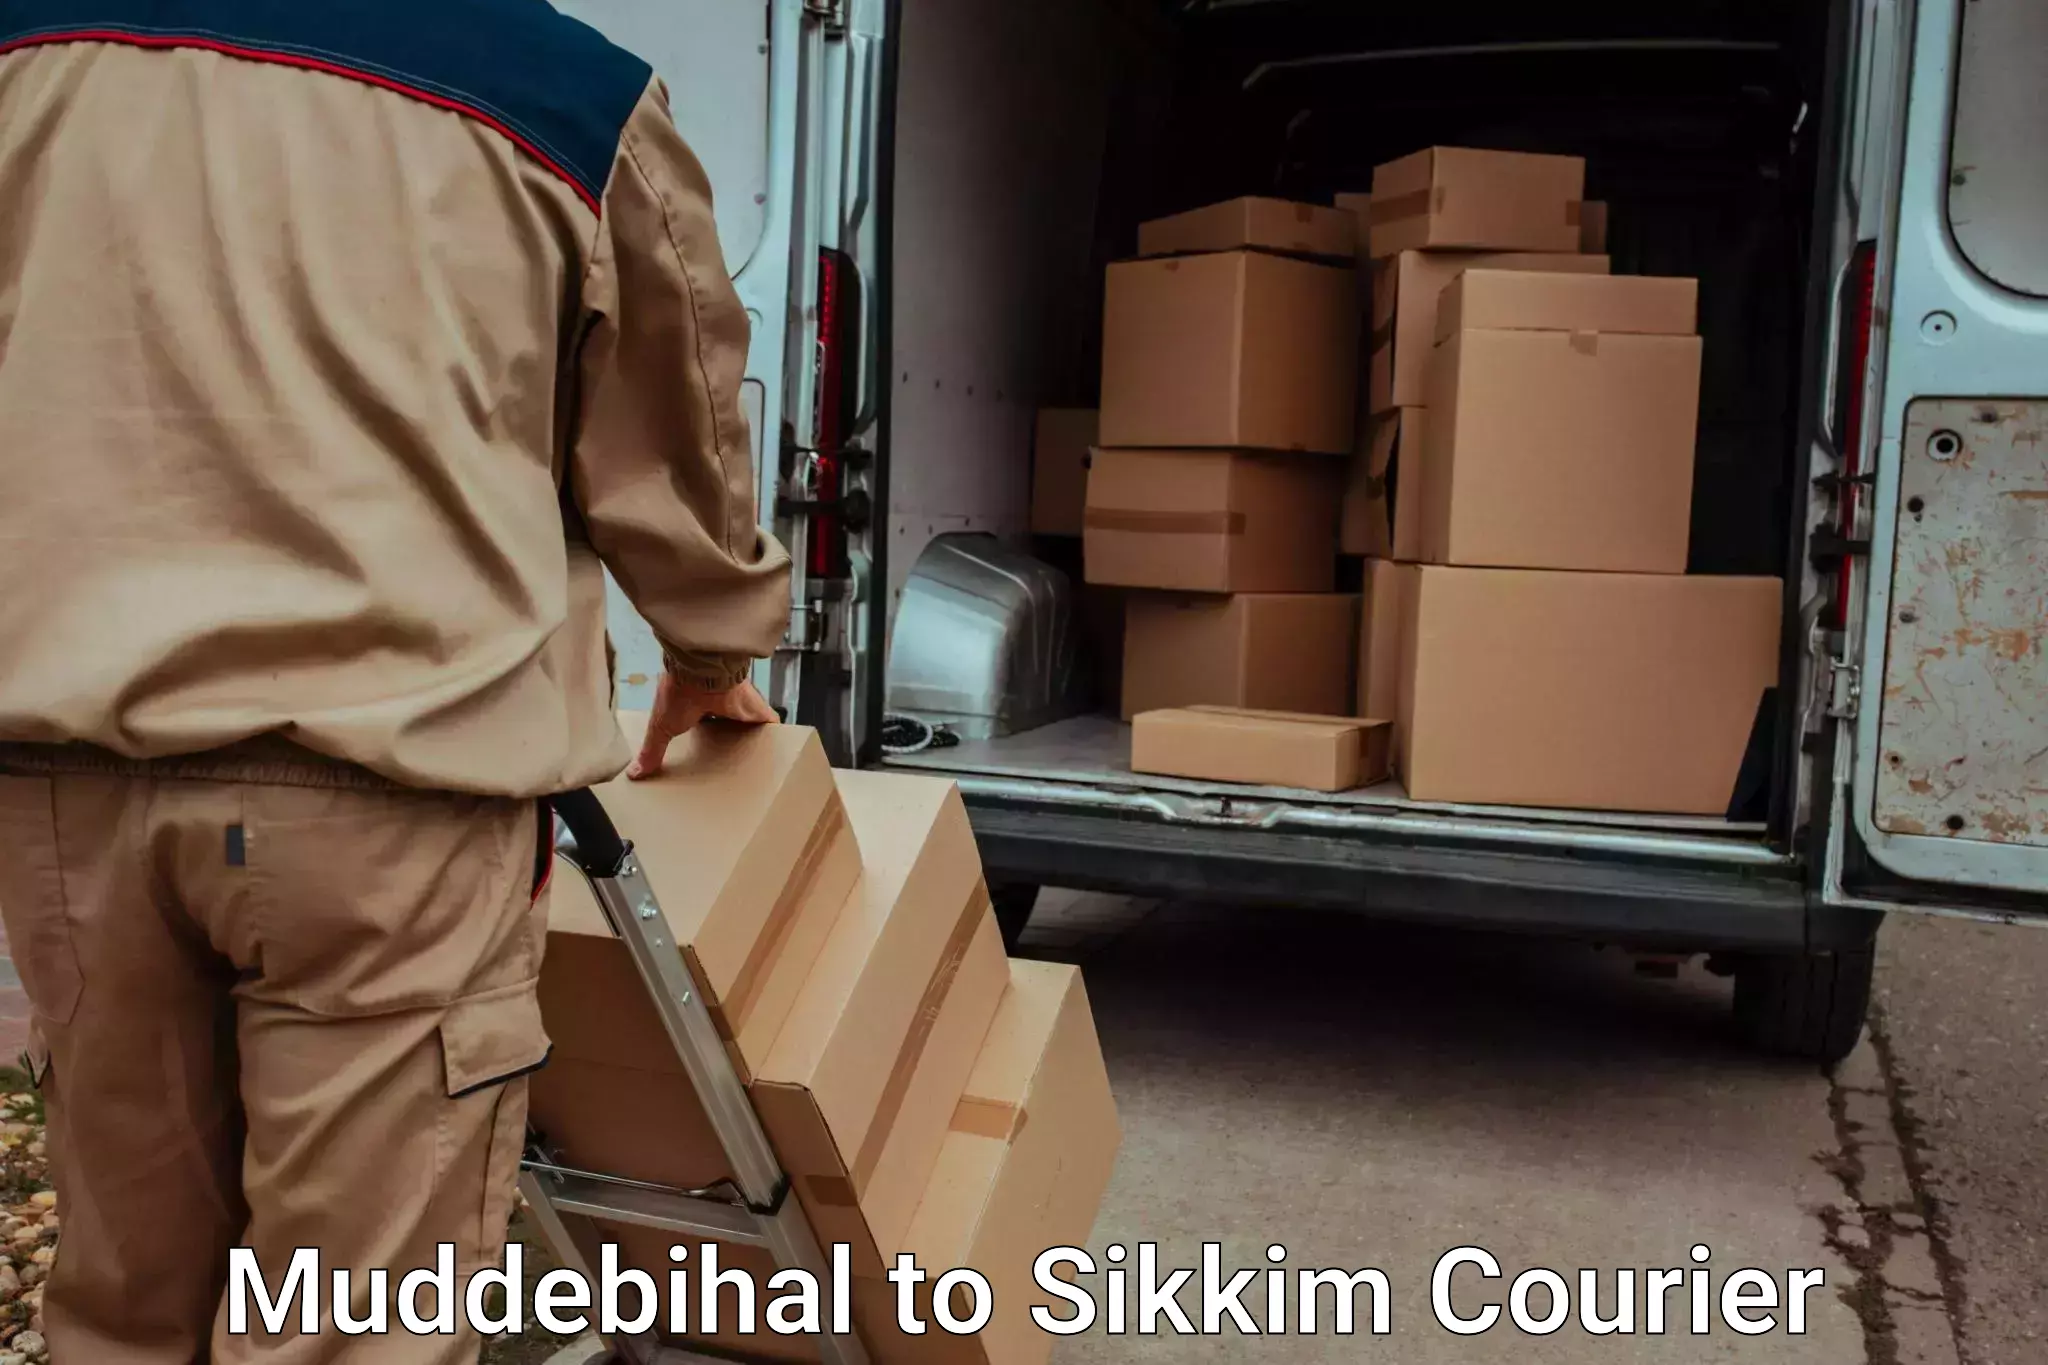 Baggage shipping advice Muddebihal to Pelling